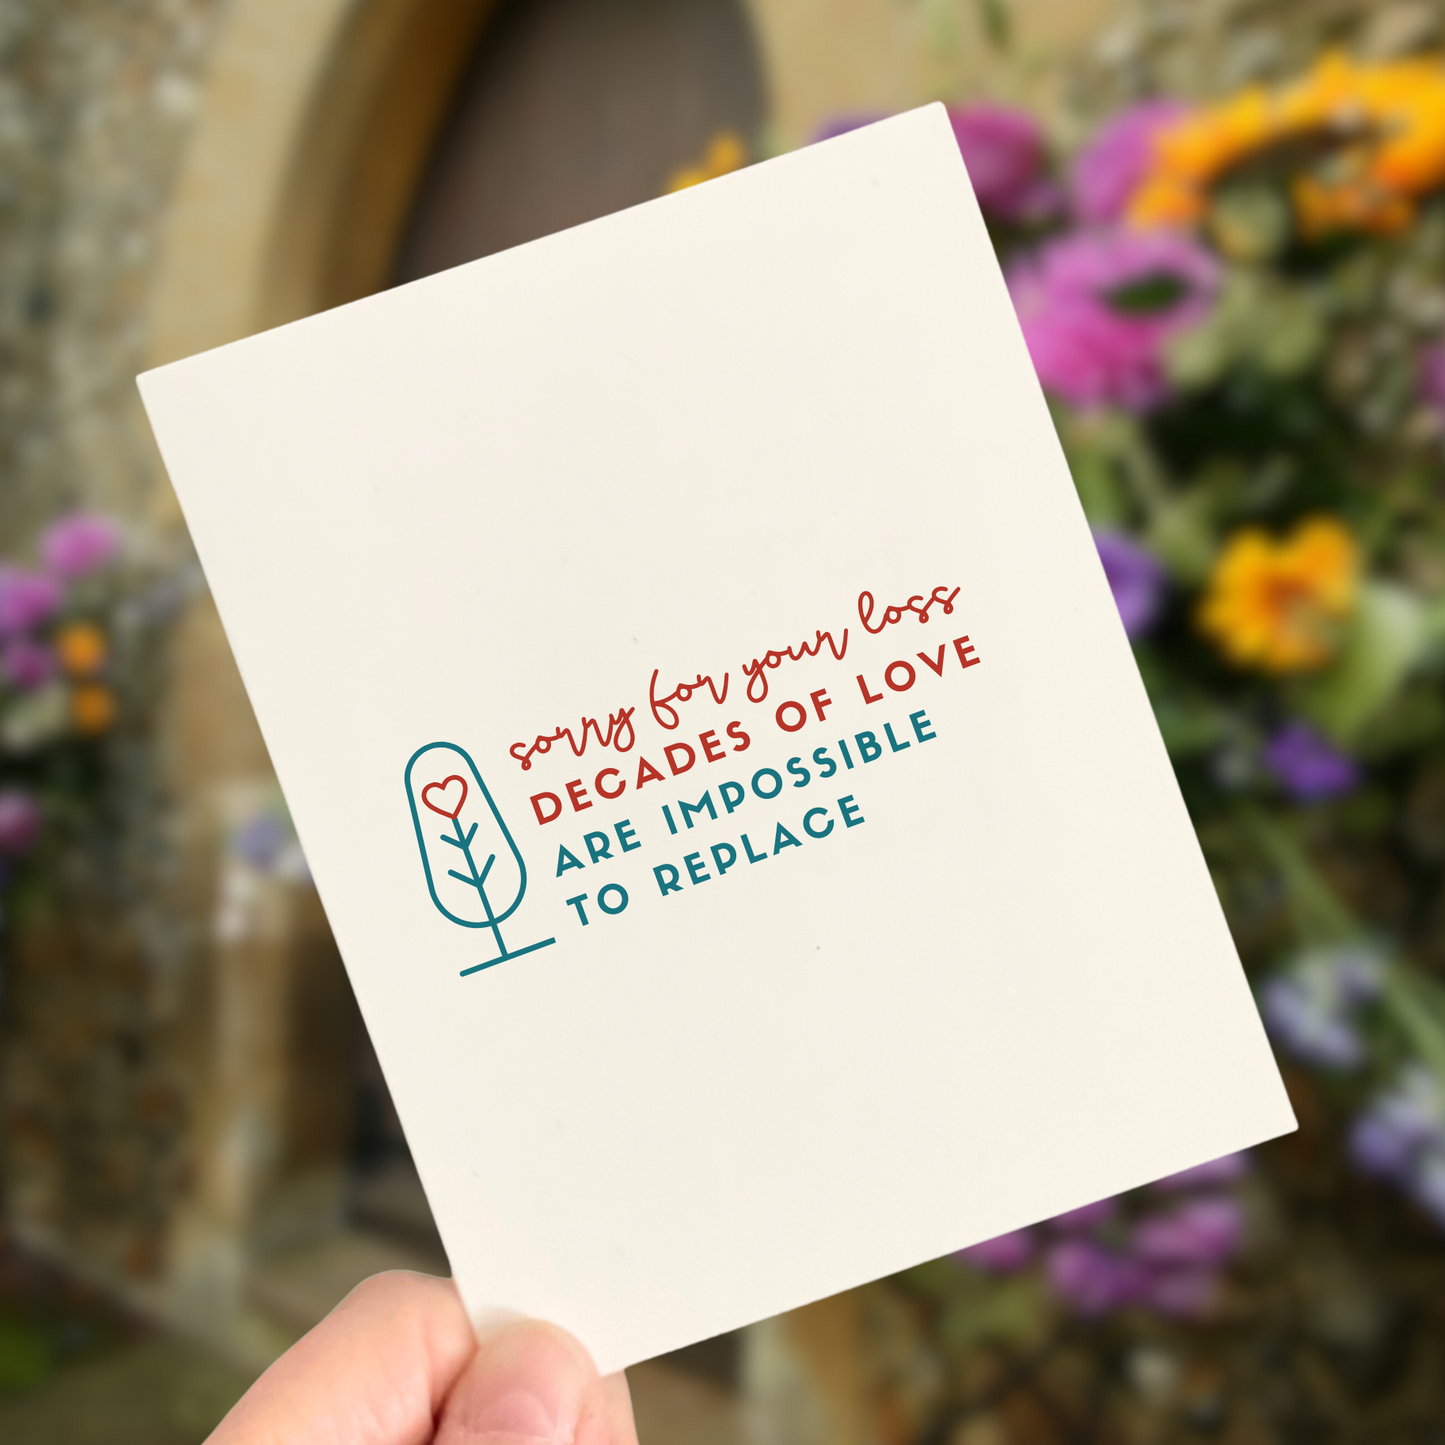 Decades of Love are Impossible to Replace, Sympathy Card